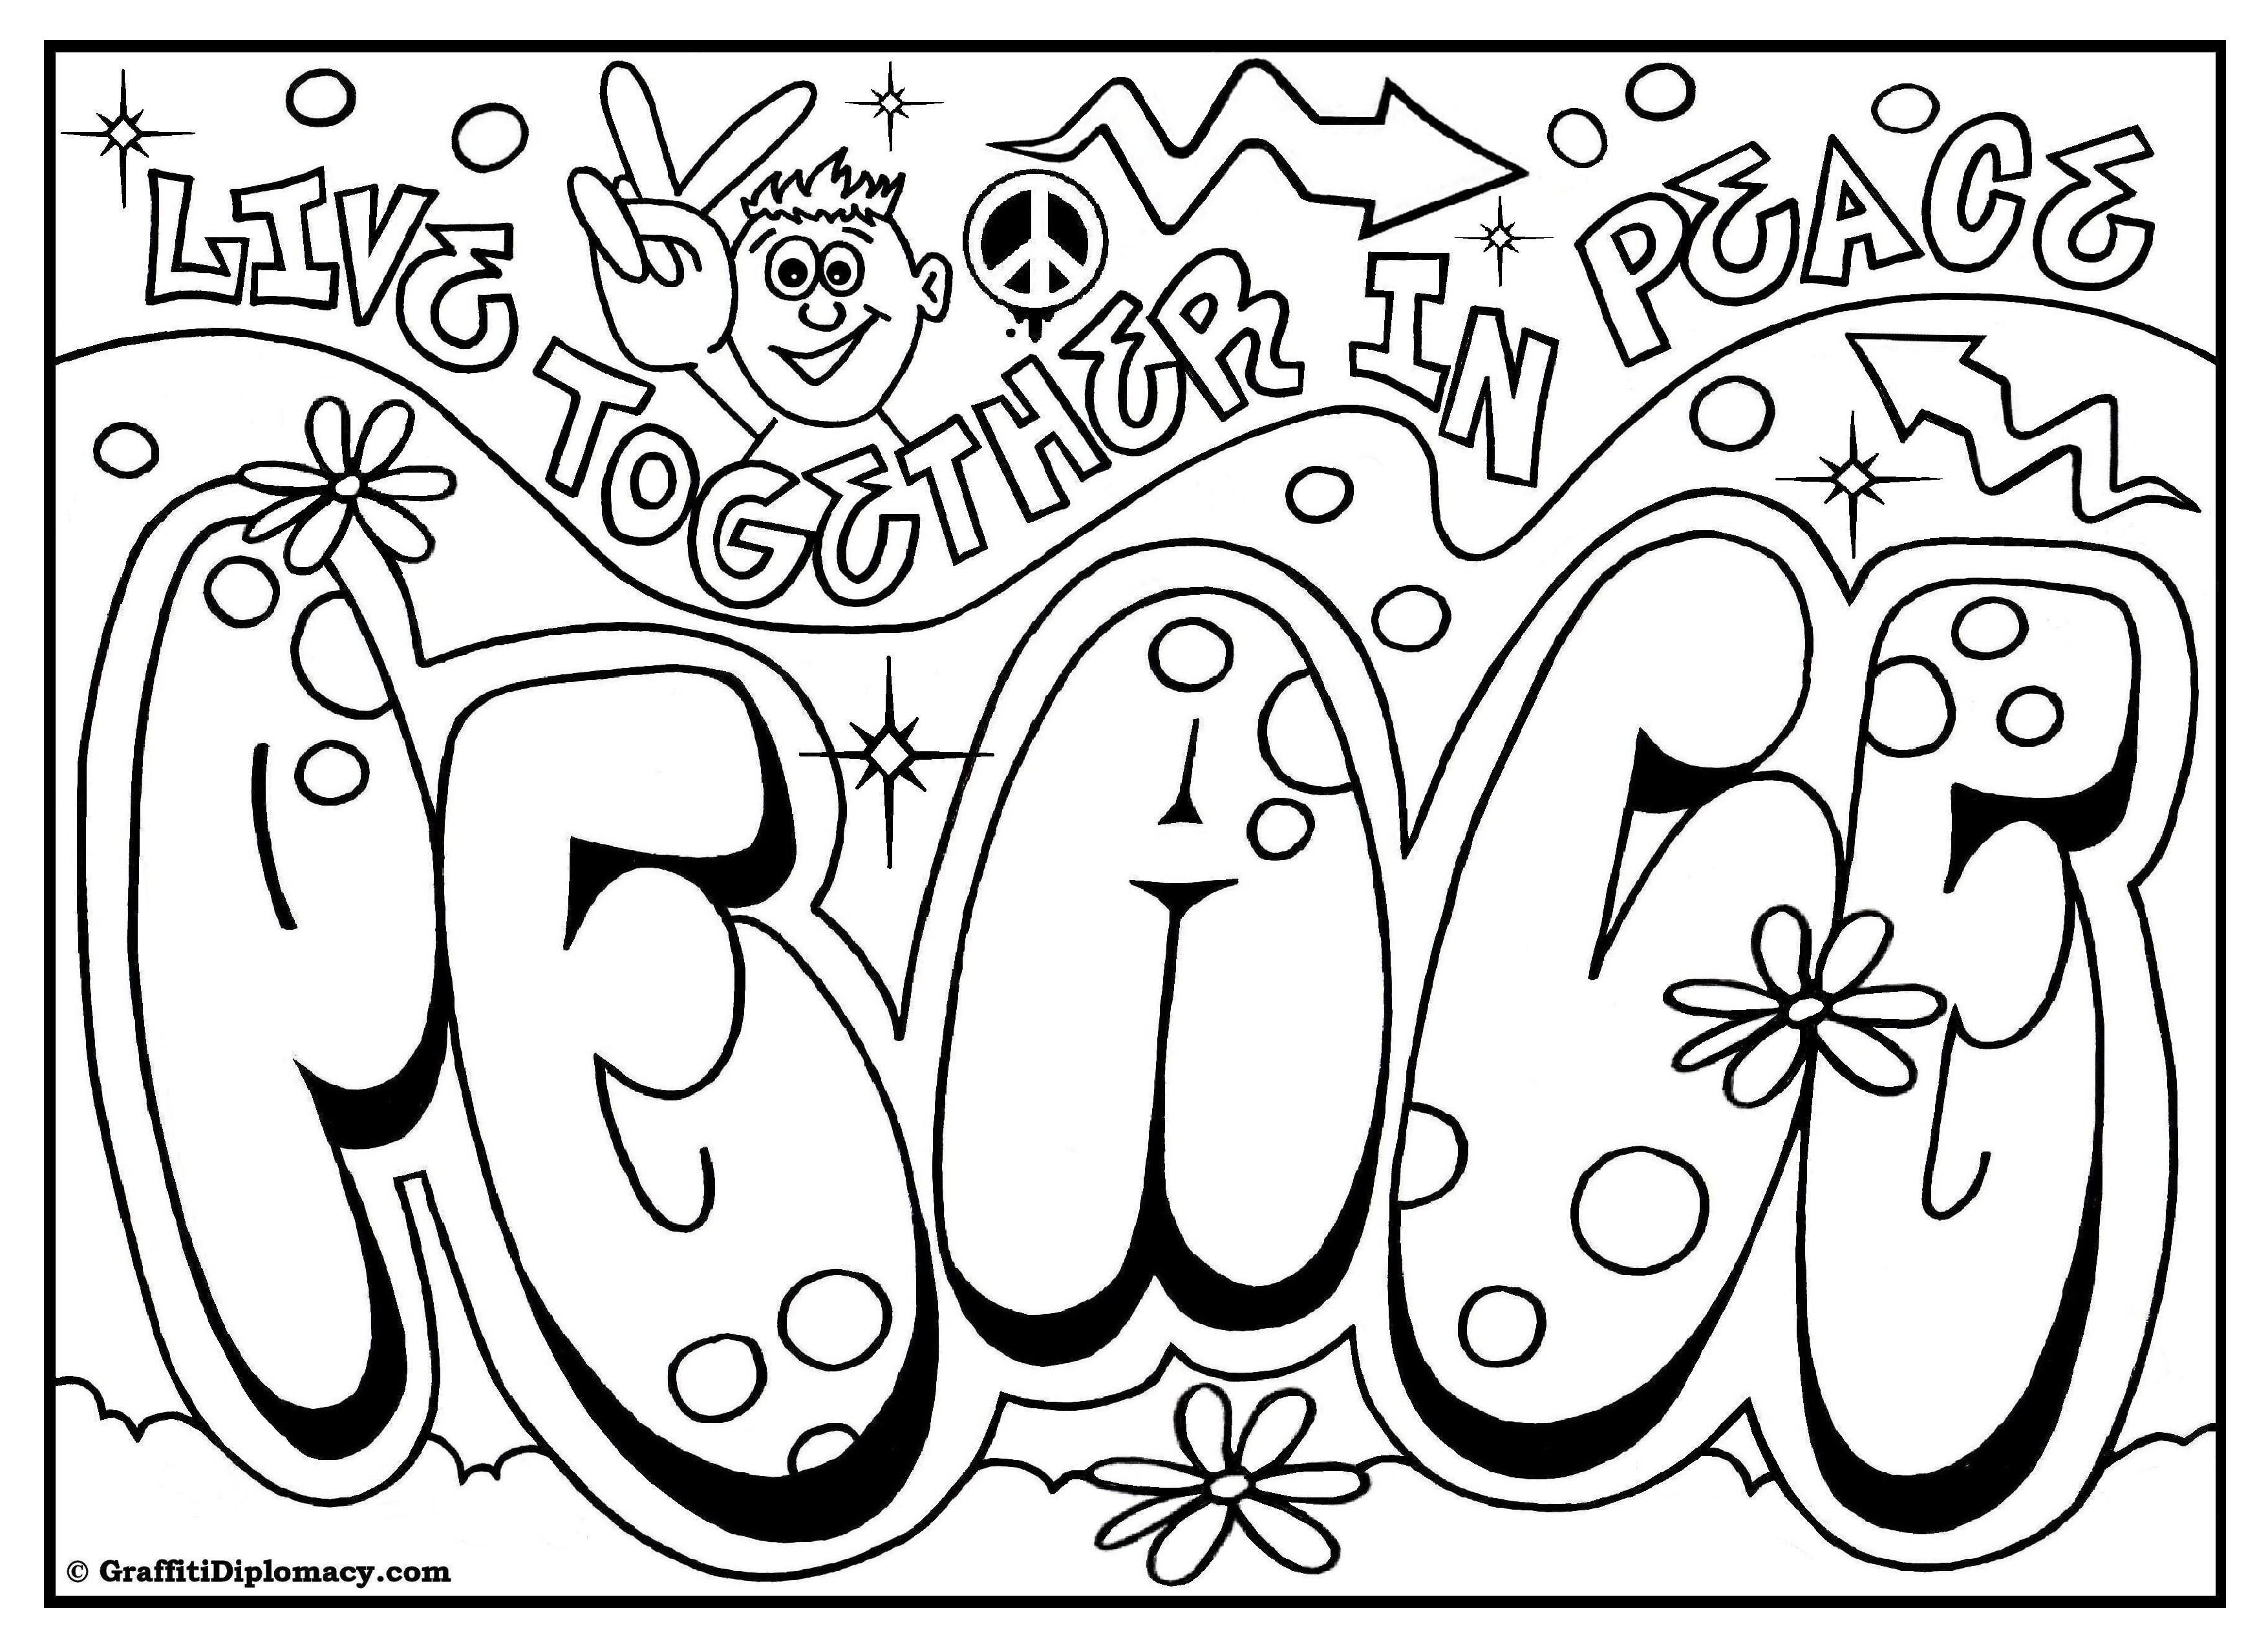 Cool Coloring Book Pages #10 - Free Printable Graffiti Coloring ...